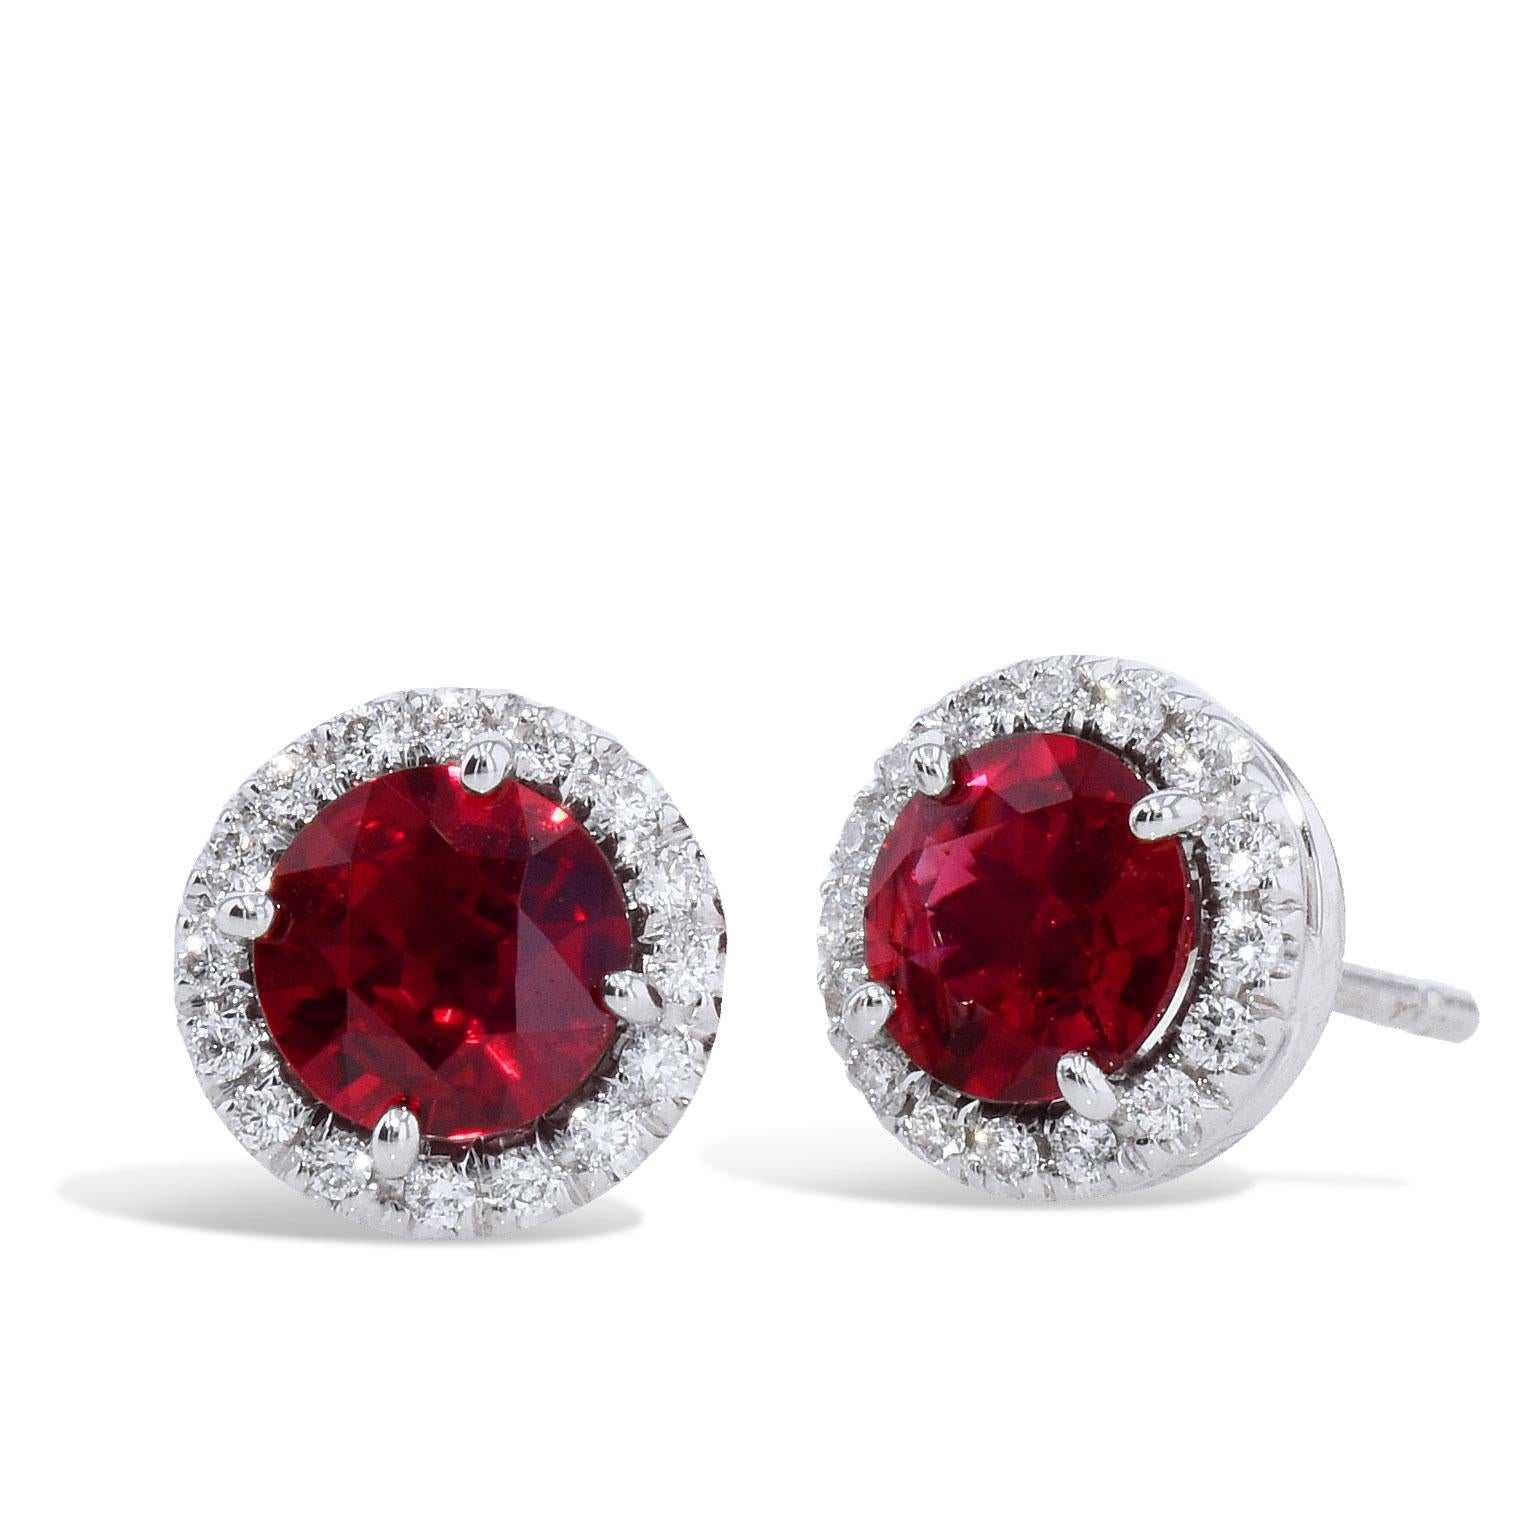 Mozambique Ruby with Diamond Halos Stud Earrings

These lovely handmade 18 karat white gold earrings feature 2 round brilliant cut Mozambique rubies in the center with a total weight of 1.57 carats. 
The rubies are surrounded by 32 round brilliant